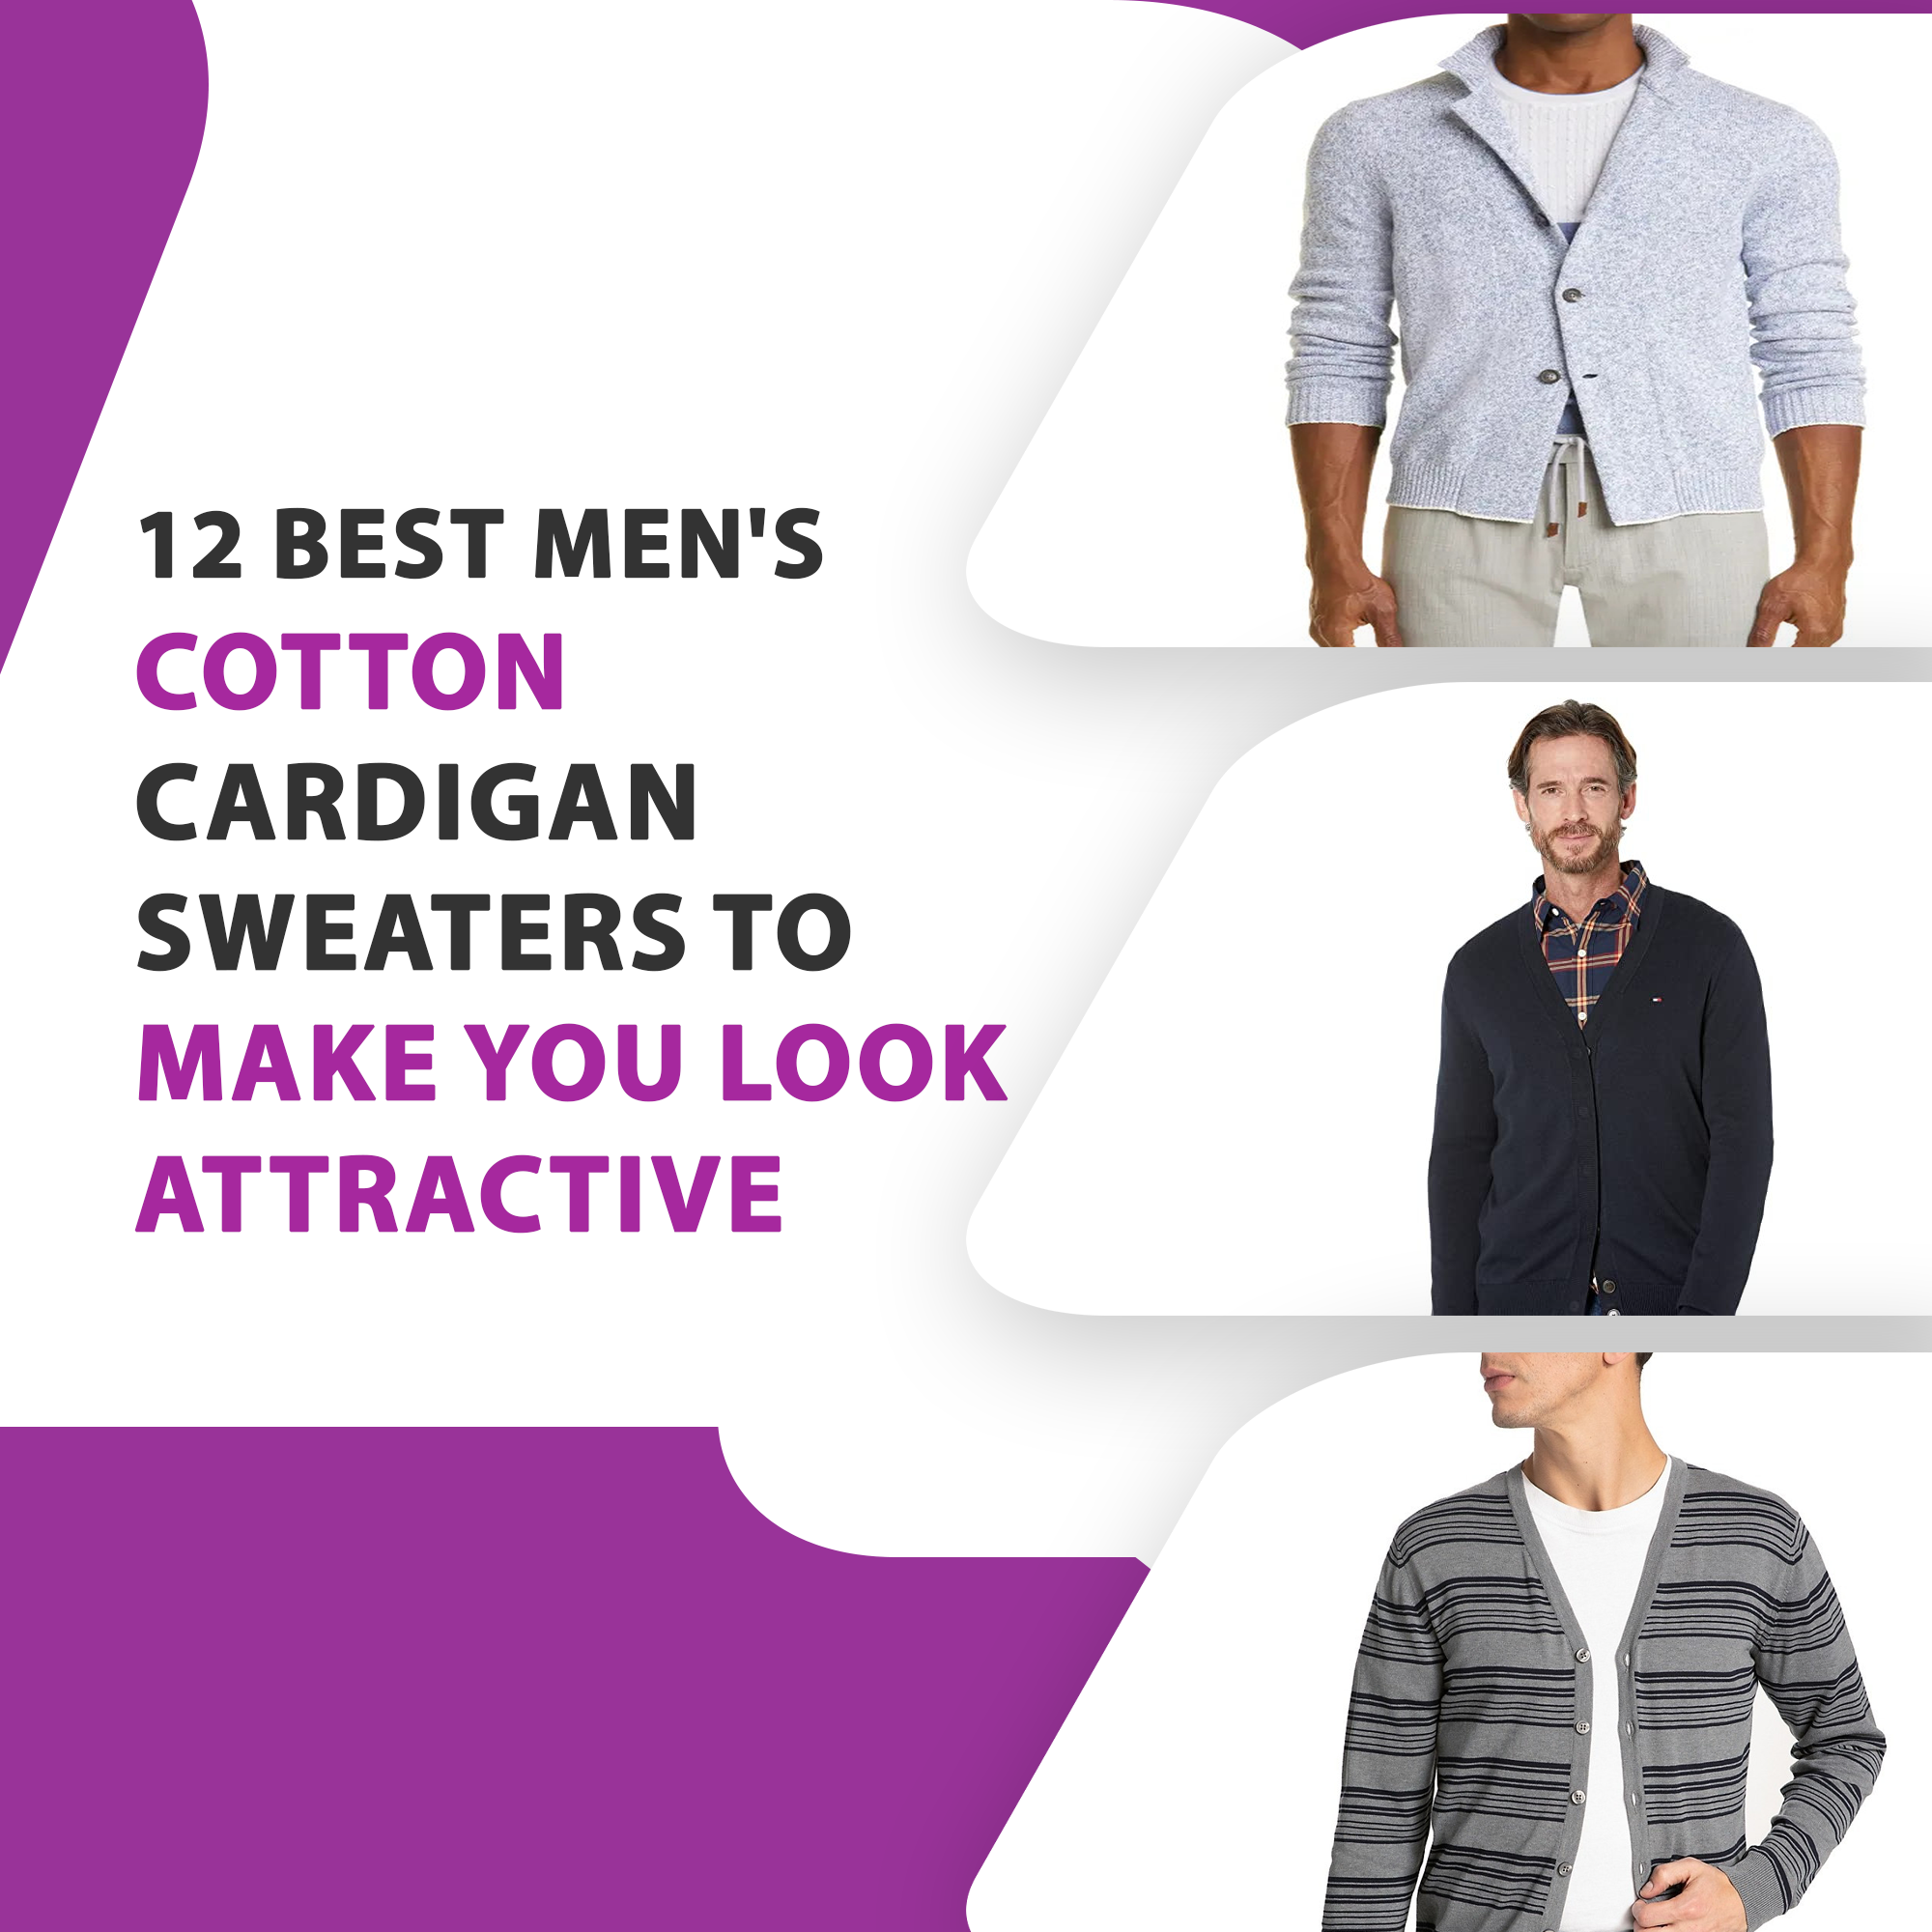 12 Best Men’s Cotton Cardigan Sweaters To Make You Look Attractive